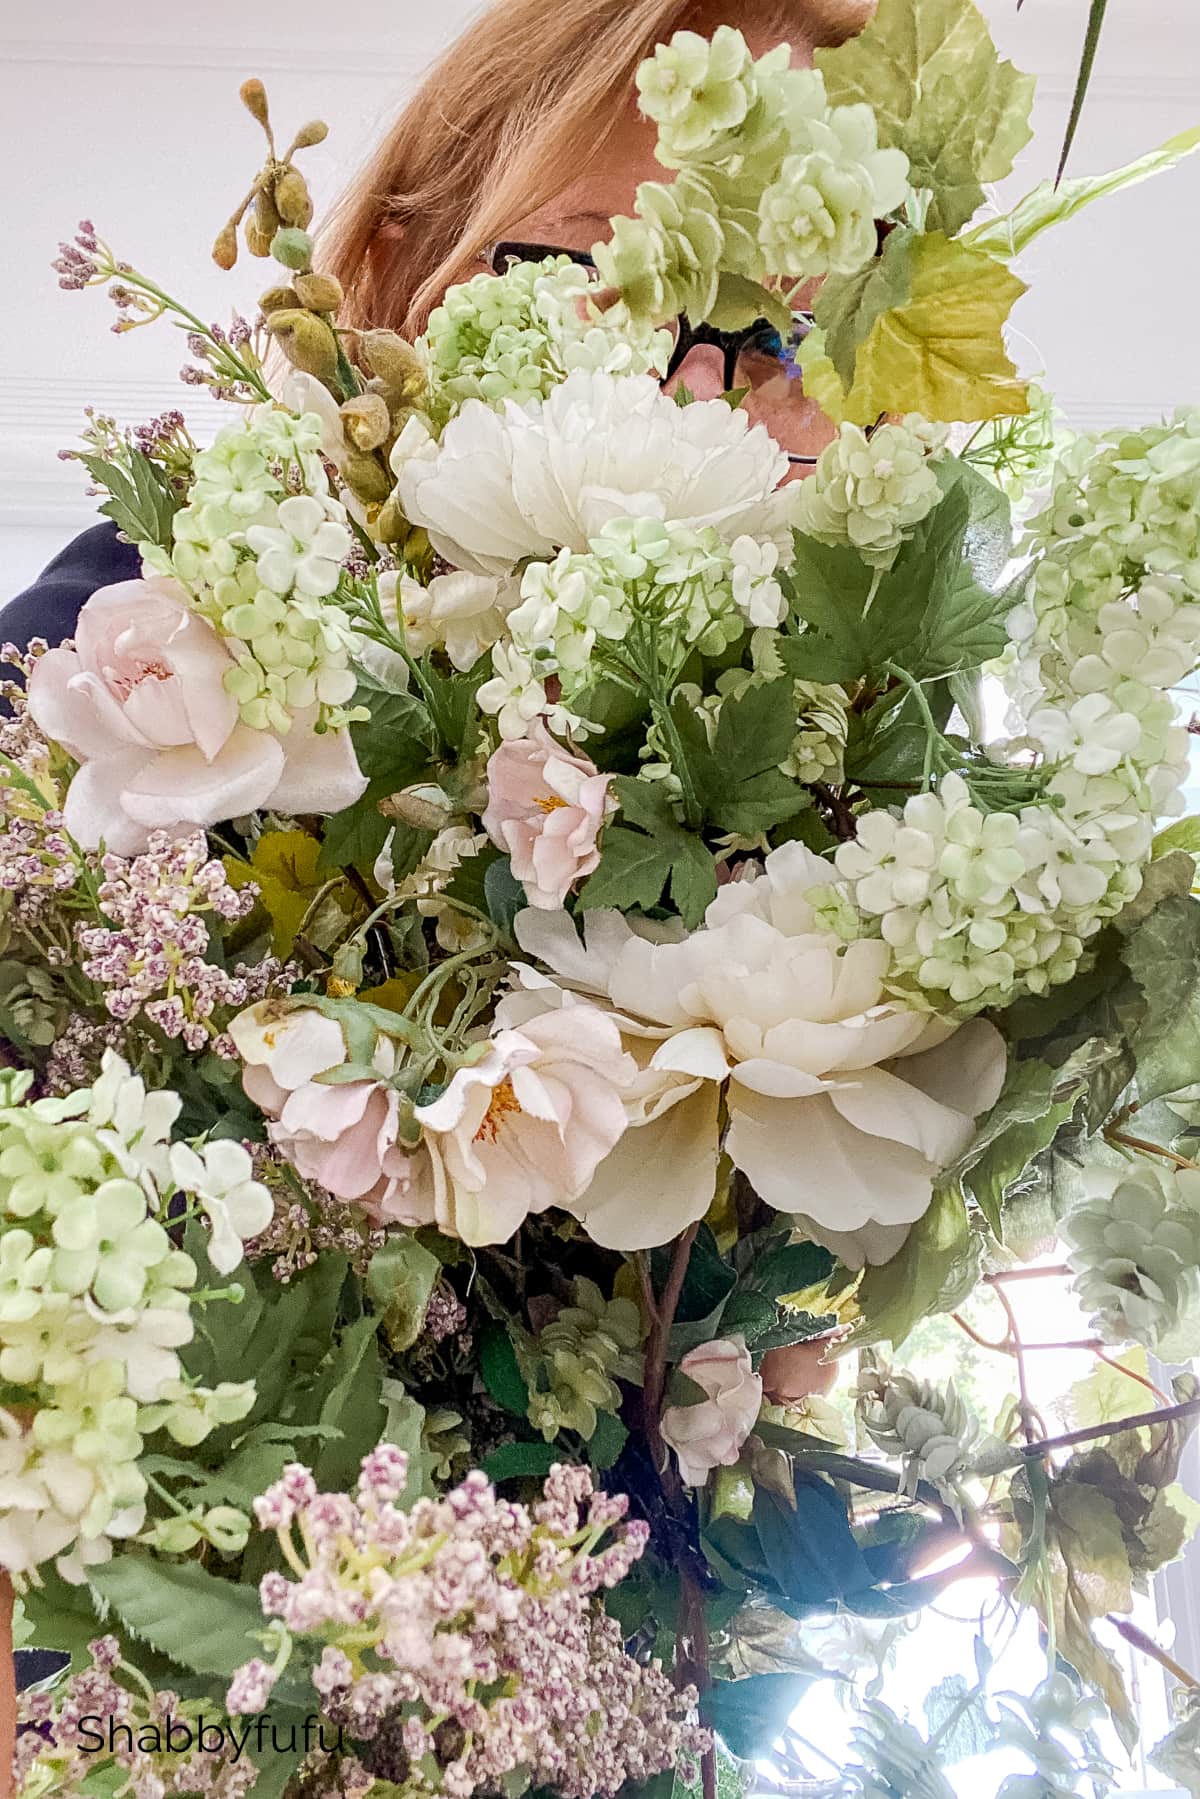 10 Tips For Making Realistic Faux Flower Centerpieces 